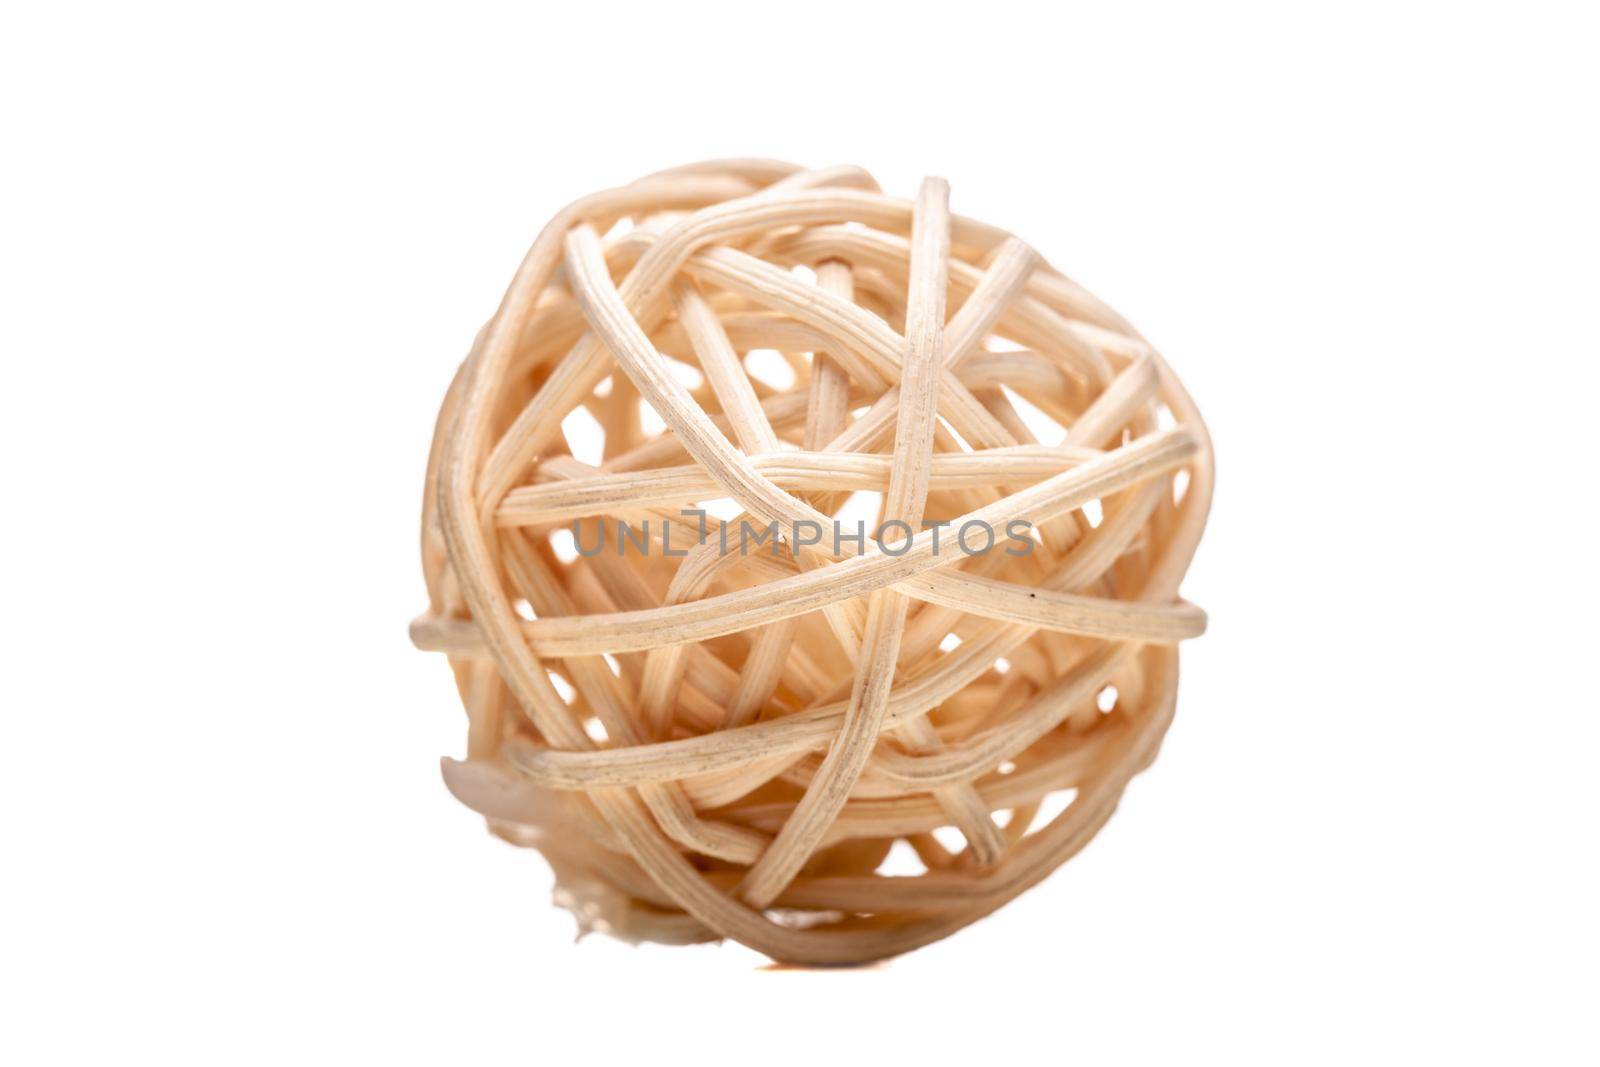 small ball made of bamboo, isolated on white background